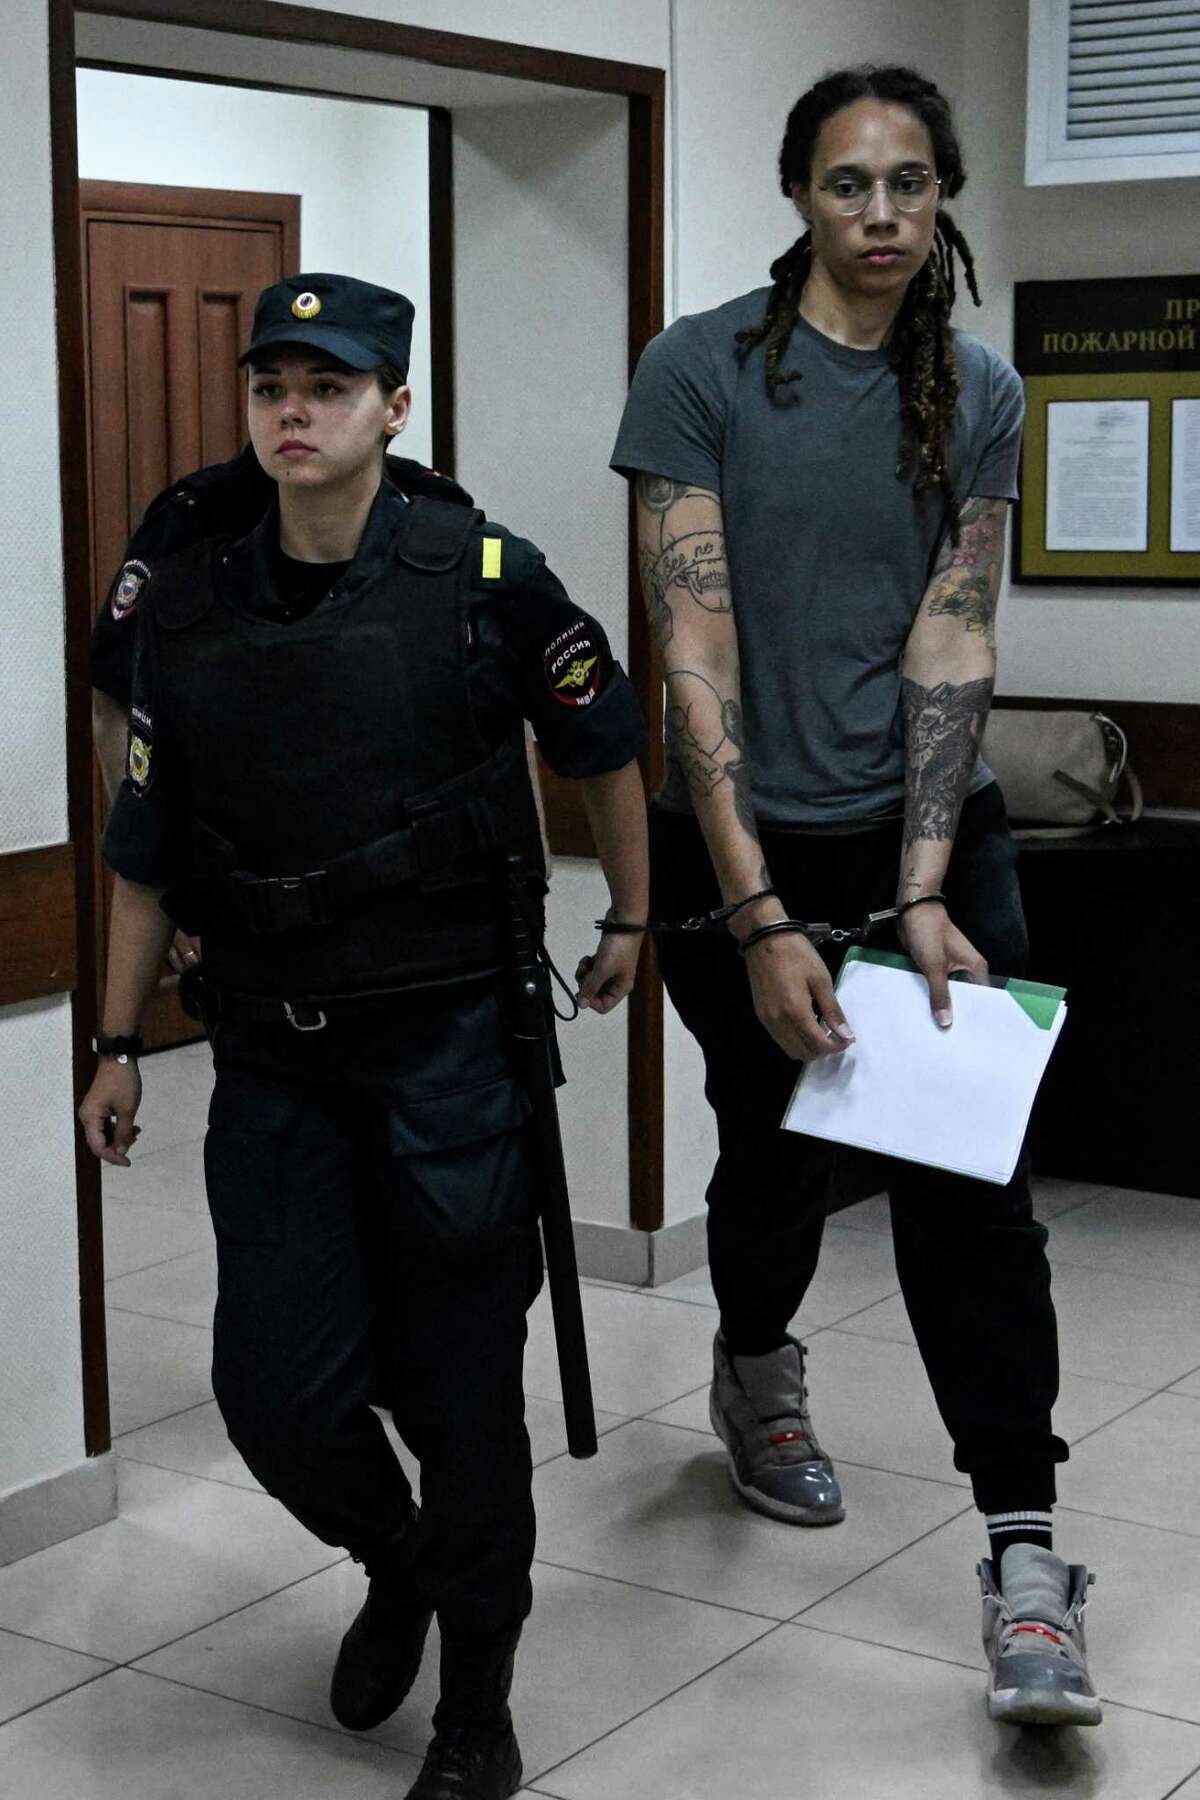 US Women's National Basketball Association (WNBA) basketball player Brittney Griner, who was detained at Moscow's Sheremetyevo airport and later charged with illegal possession of cannabis, leaves the courtroom after the court's verdict in Khimki outside Moscow, on August 4, 2022. - A Russian court found Griner guilty of smuggling and storing narcotics after prosecutors requested a sentence of nine and a half years in jail for the athlete. (Photo by Kirill KUDRYAVTSEV / AFP) (Photo by KIRILL KUDRYAVTSEV/AFP via Getty Images)